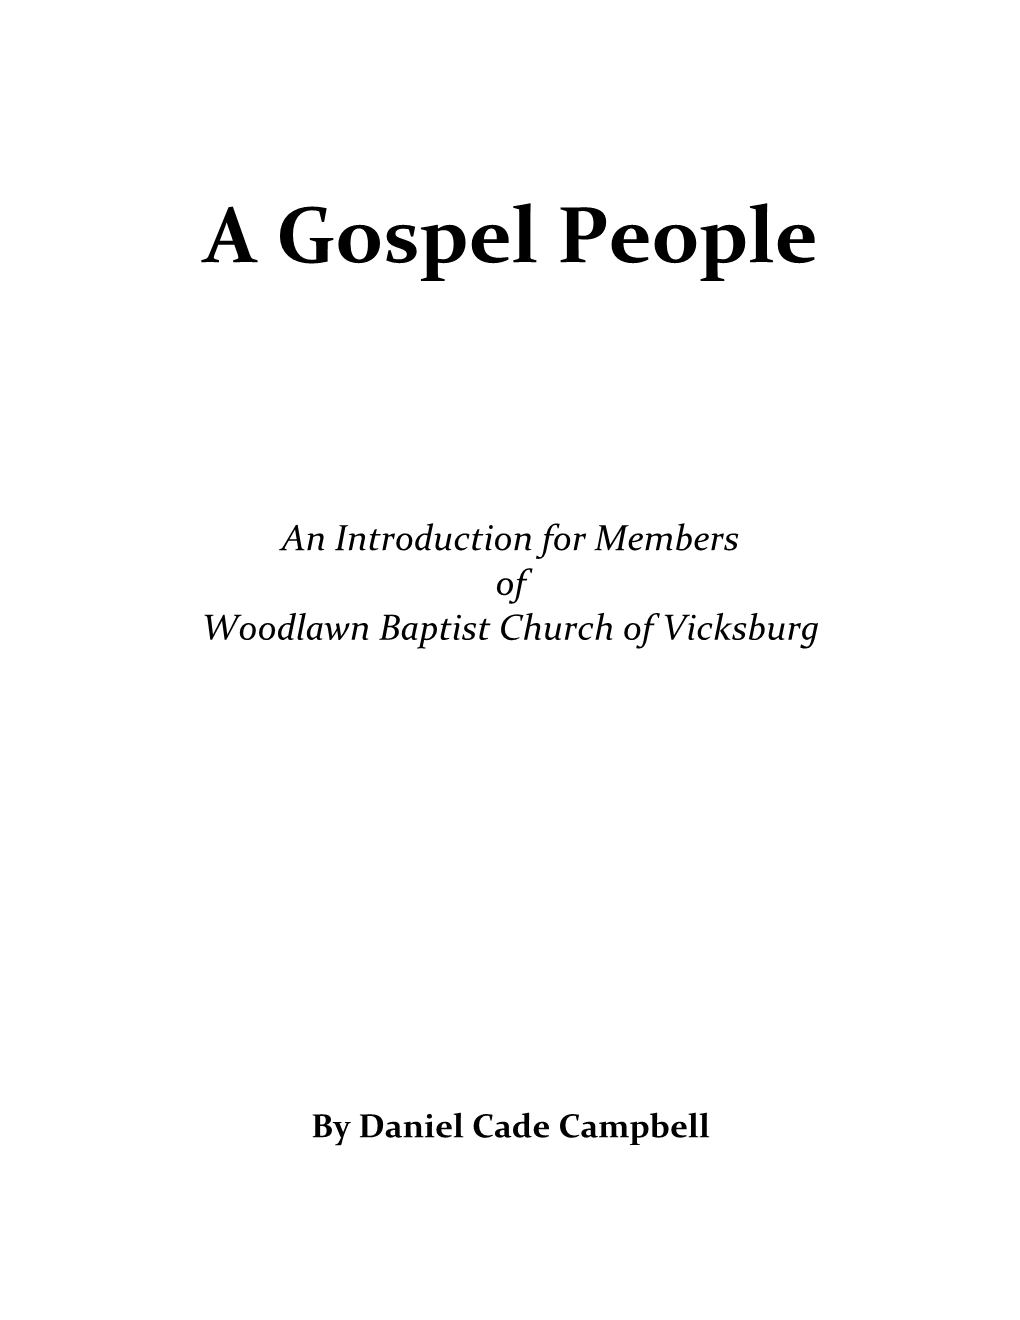 A Gospel People: an Introduction for Members of Woodlawn Baptist Church of Vicksburg